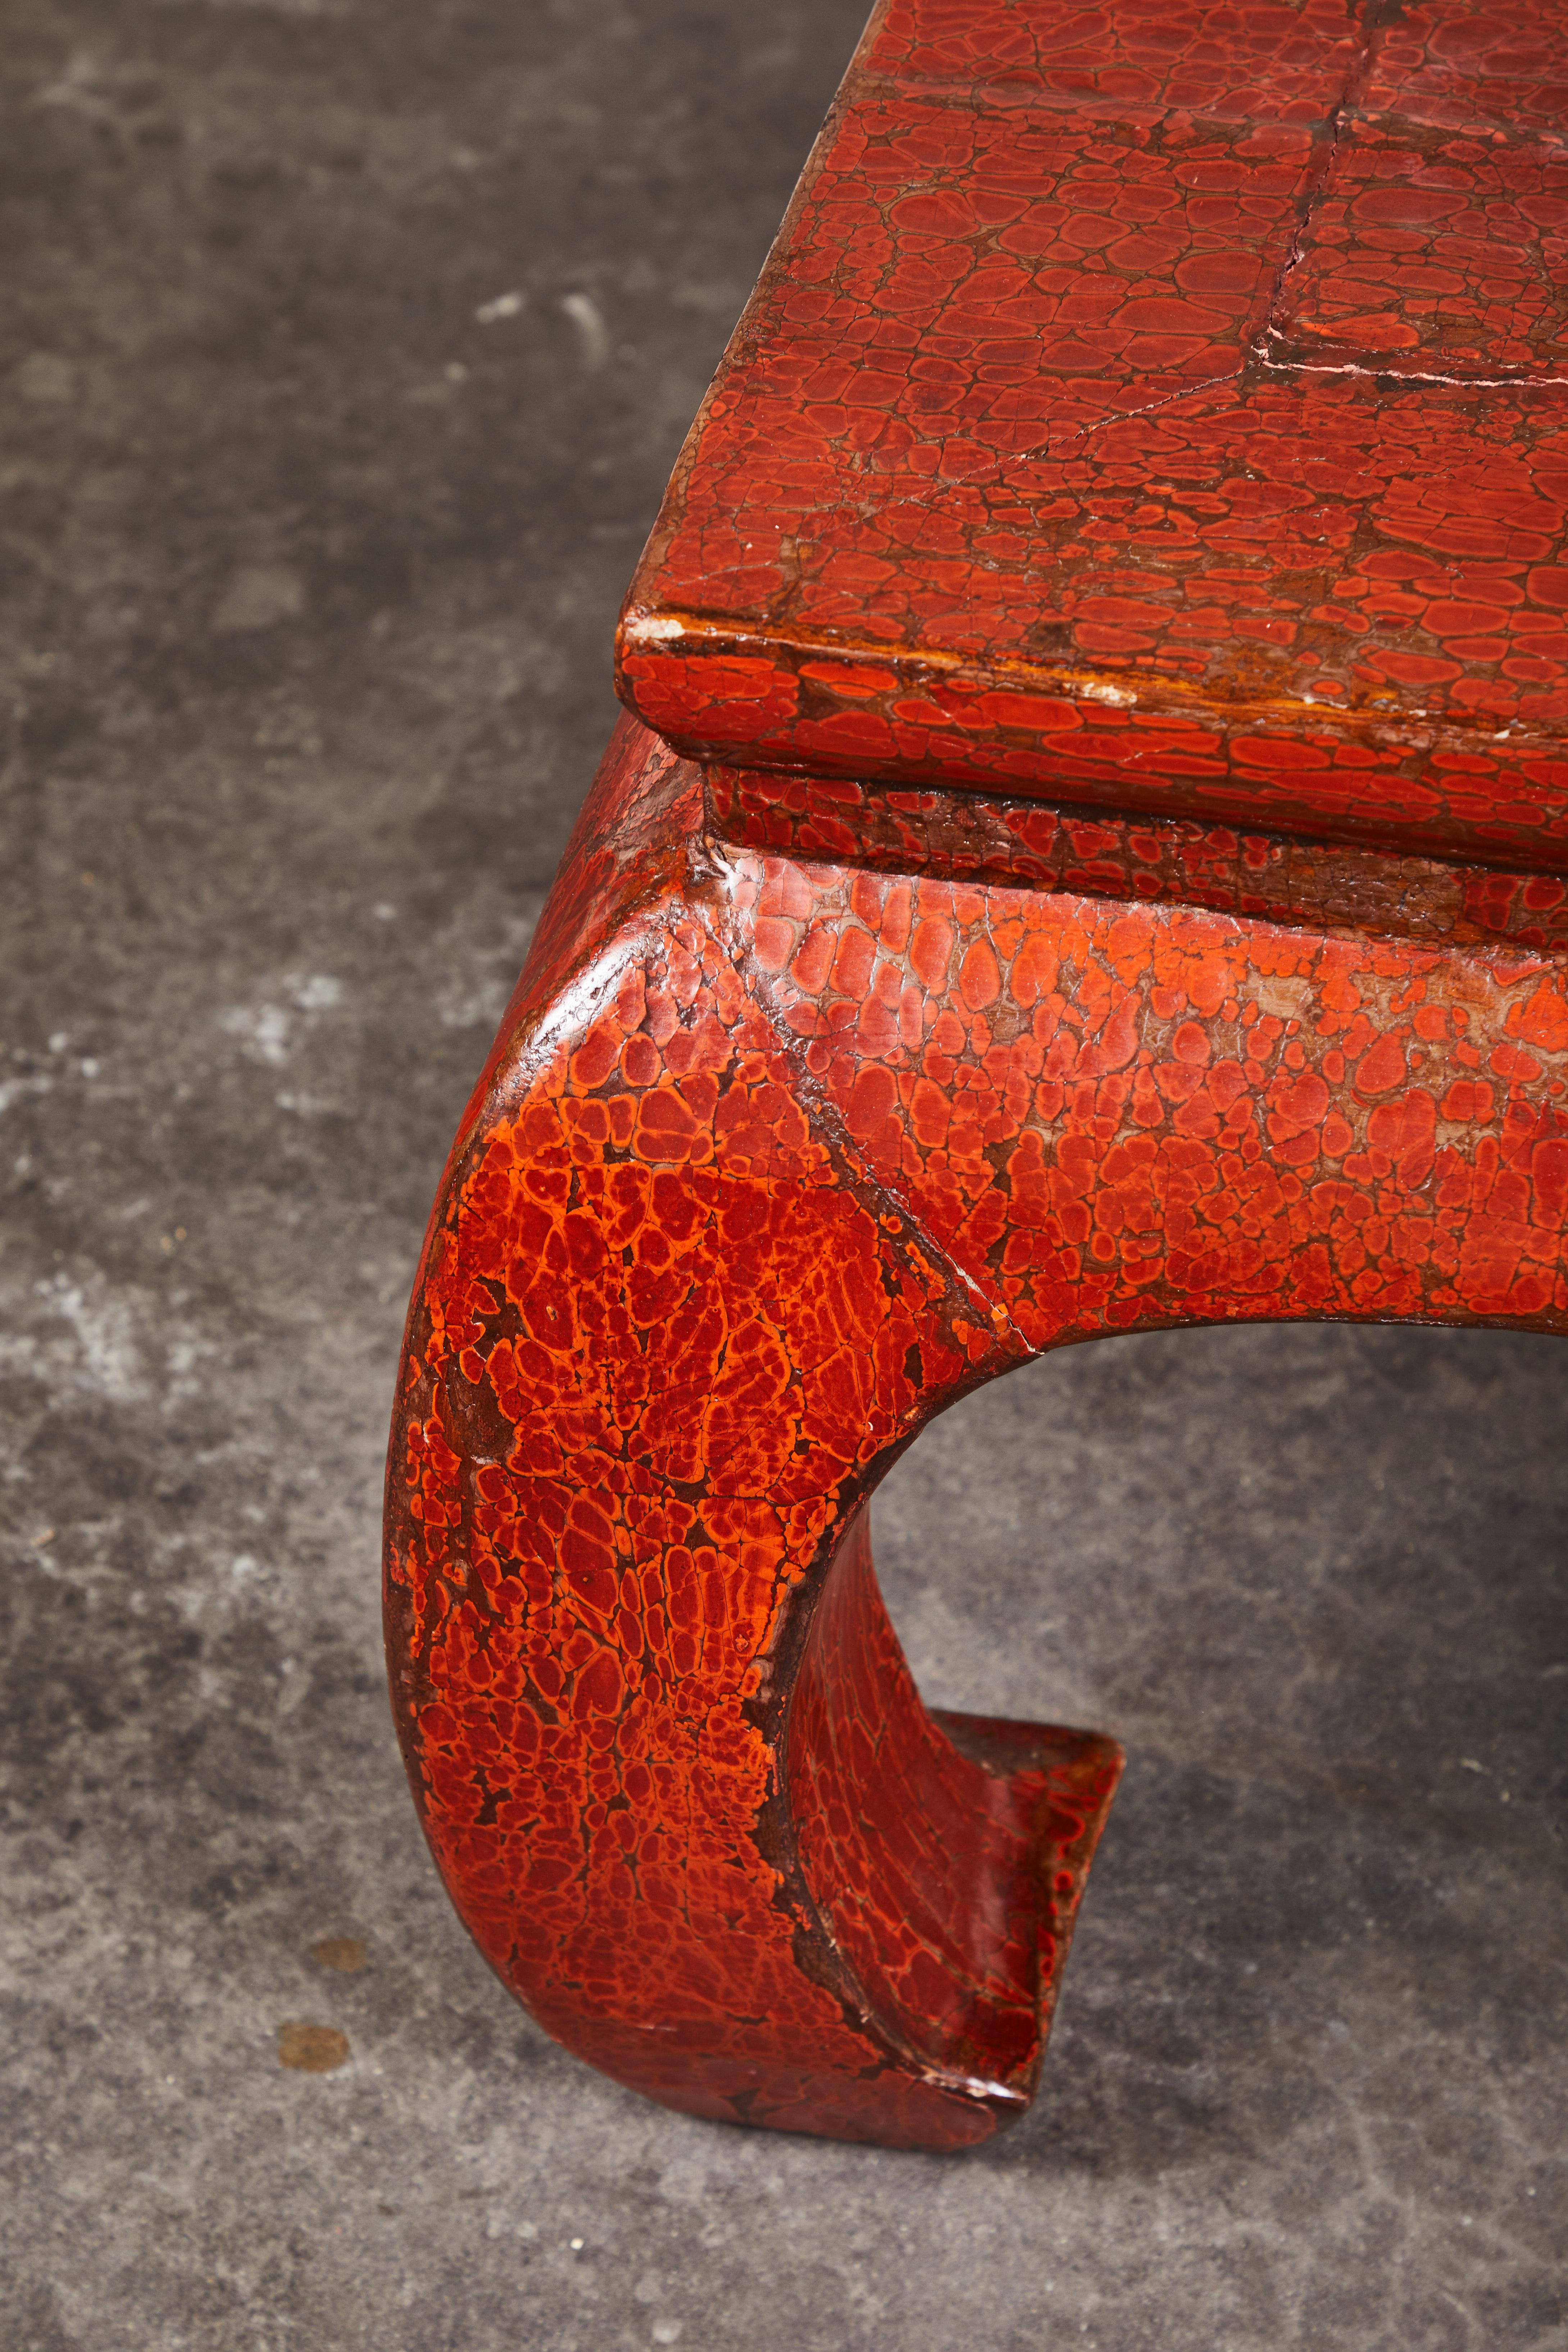 A 19th century red lacquer kang table. Recently refreshed, but original crackled red lacquer finish. Smaller size makes this table functional in smaller living spaces. Slightly rectangular overall shape, timeless antique design.